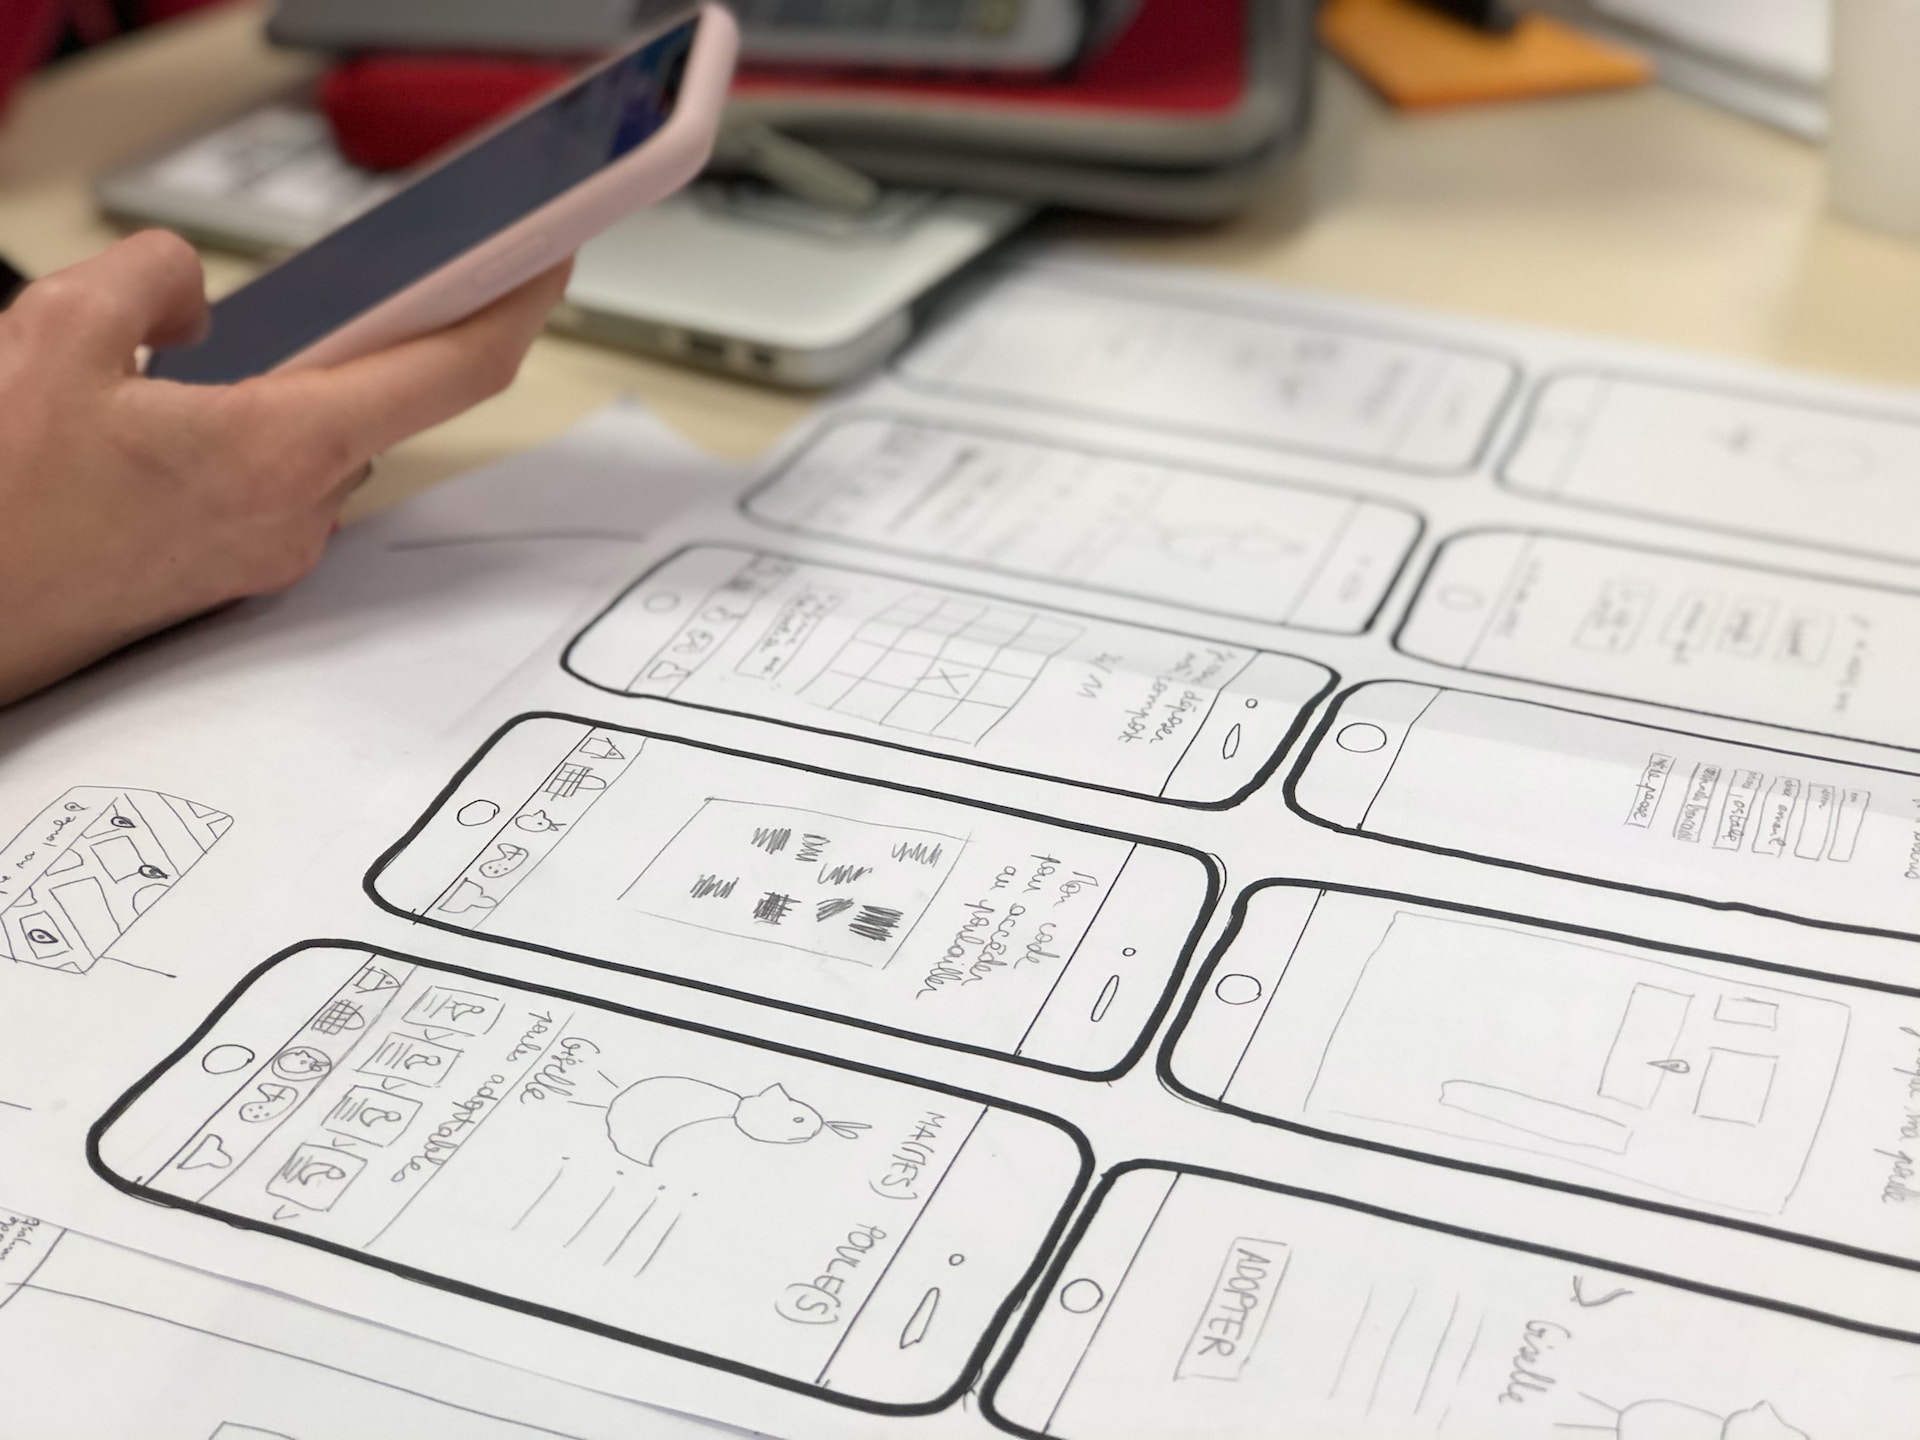 What are the challenges of hiring a UX designer